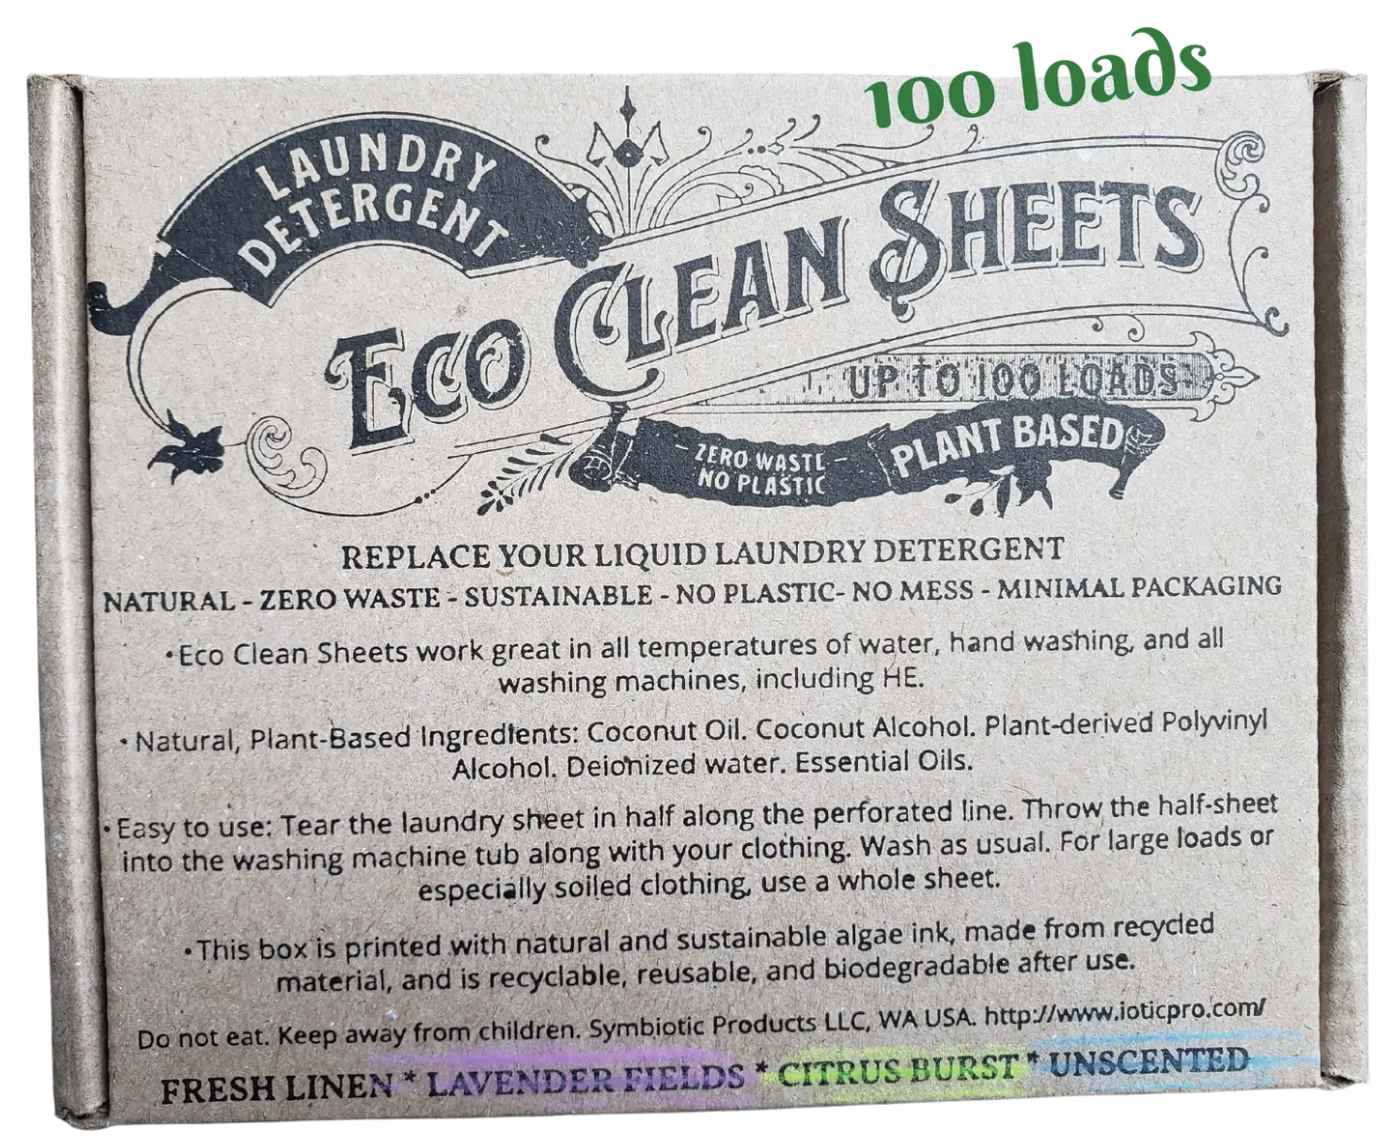 Laundry Strips - Eco Clean - 100 Loads